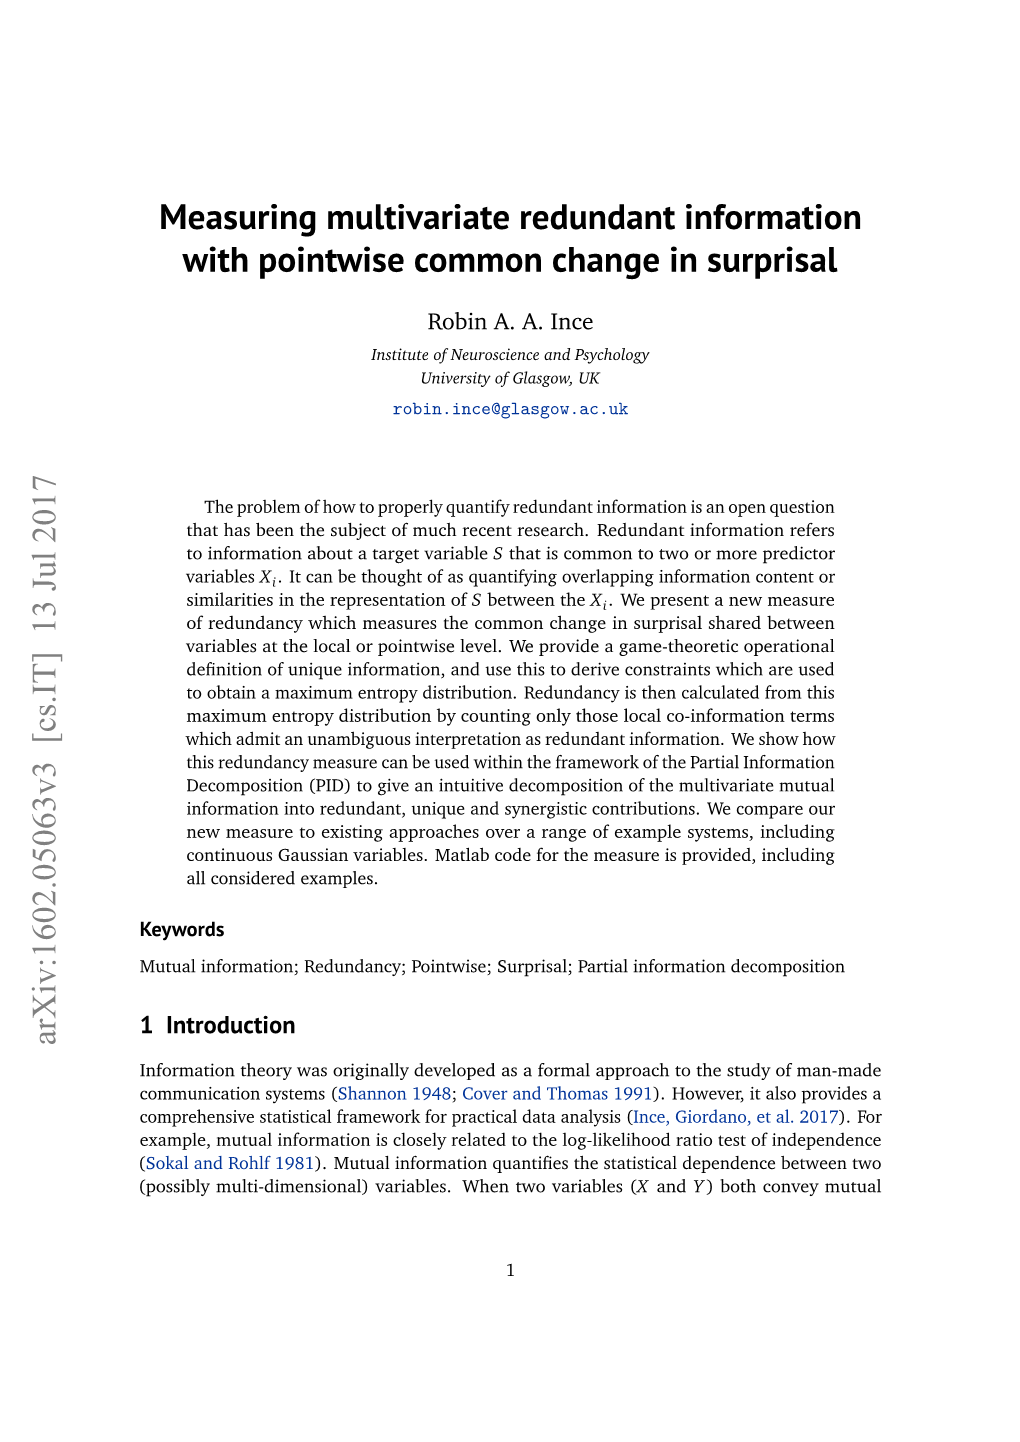 Measuring Multivariate Redundant Information with Pointwise Common Change in Surprisal